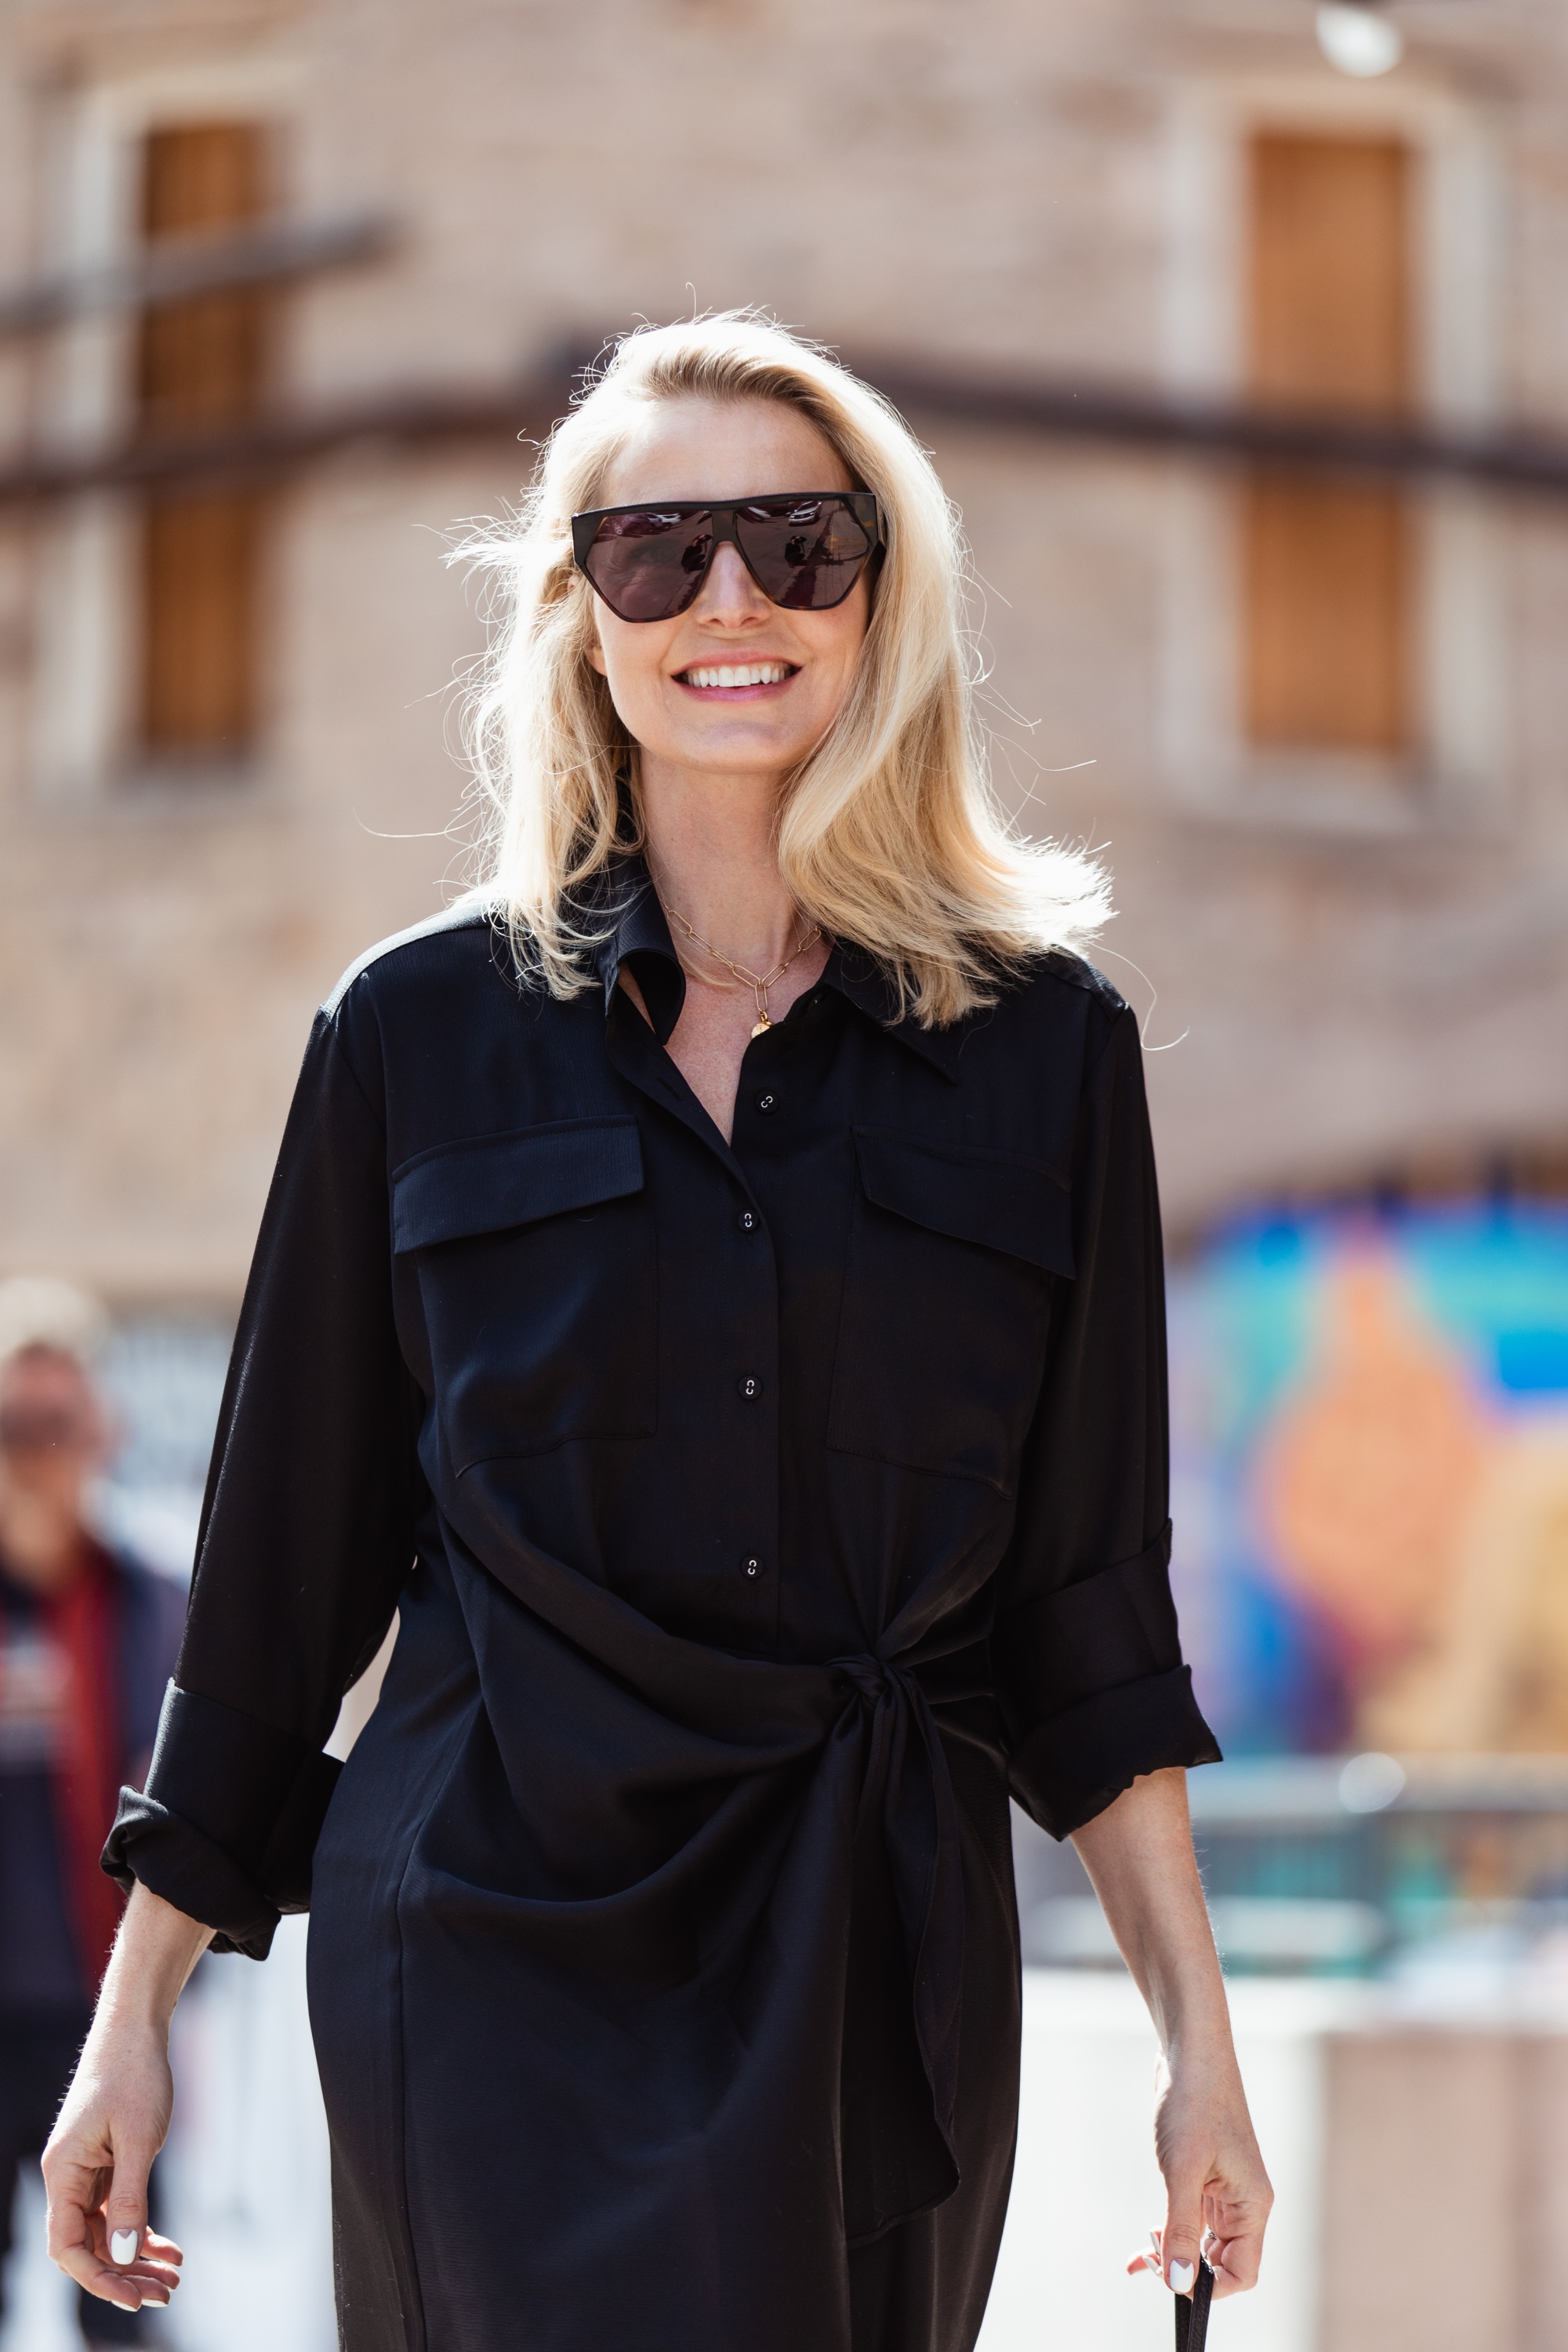 Spring Accessories, Fashion blogger Erin Busbee of BusbeeStyle.com wearing a black L'Academie shirt dress with transparent and leopard strap heels and black bracelet bag from Vince Camuto walking in Telluride, Colorado